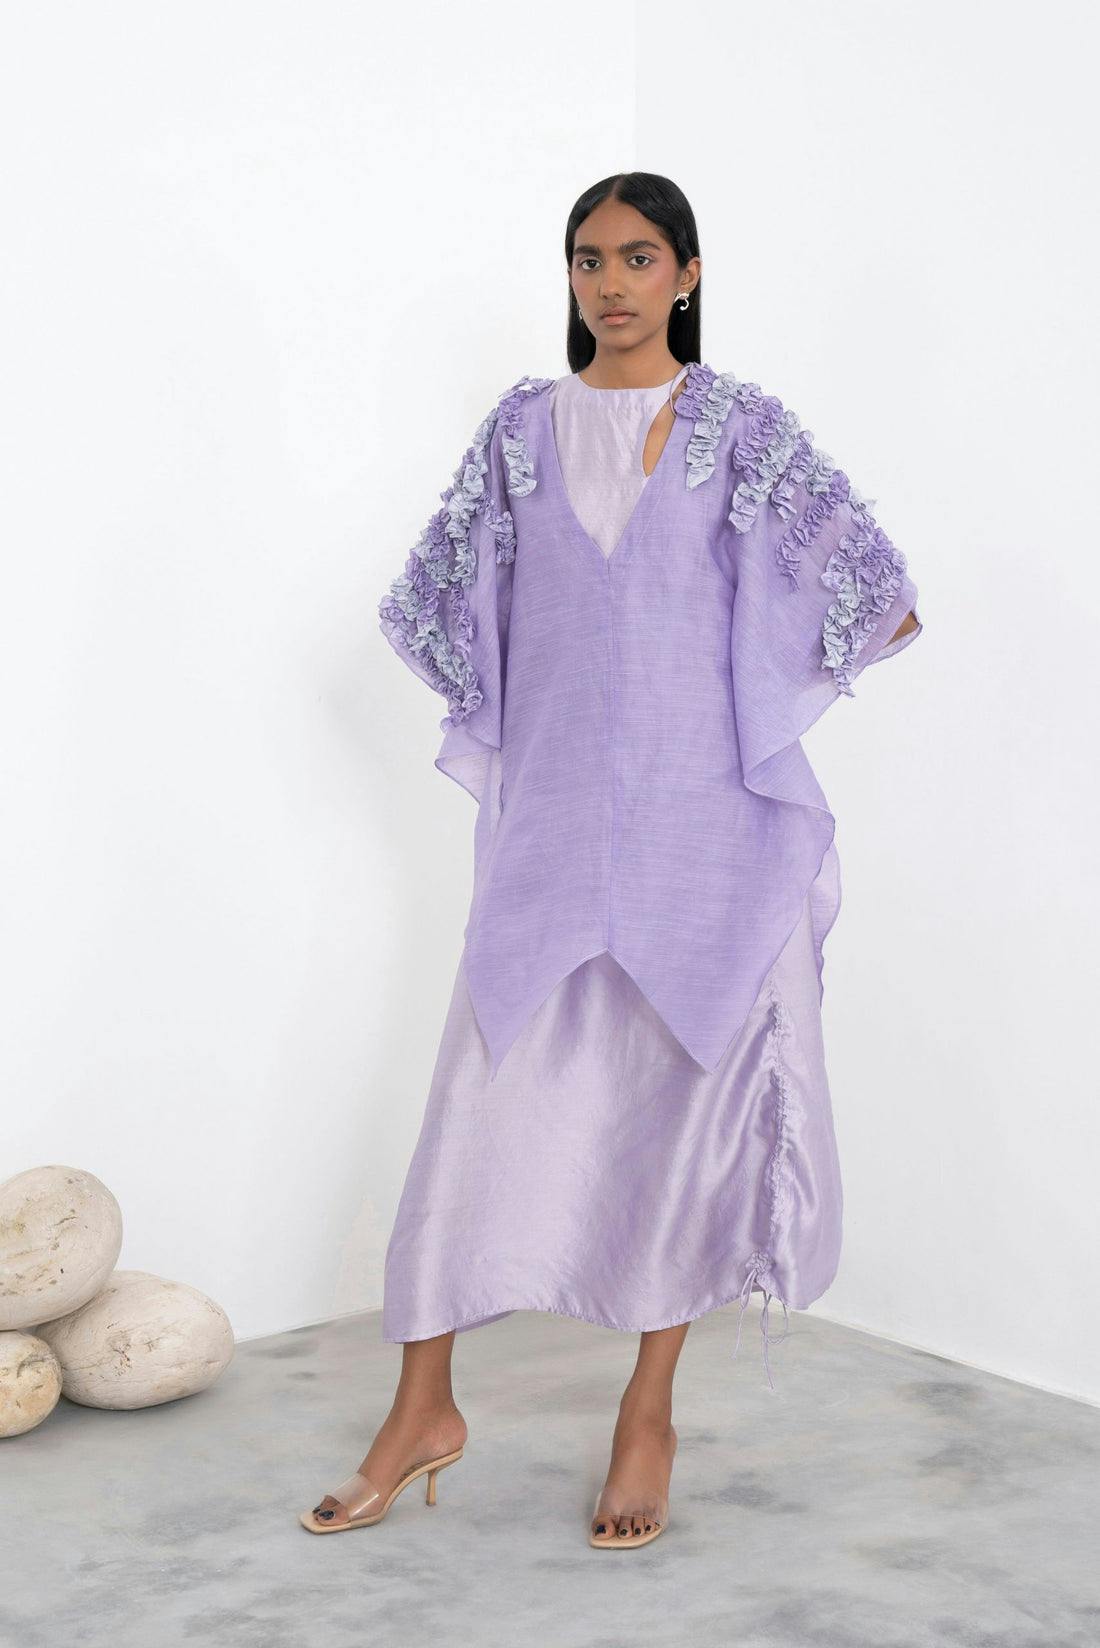 Blooming Veronica Cape, a product by Corpora Studio